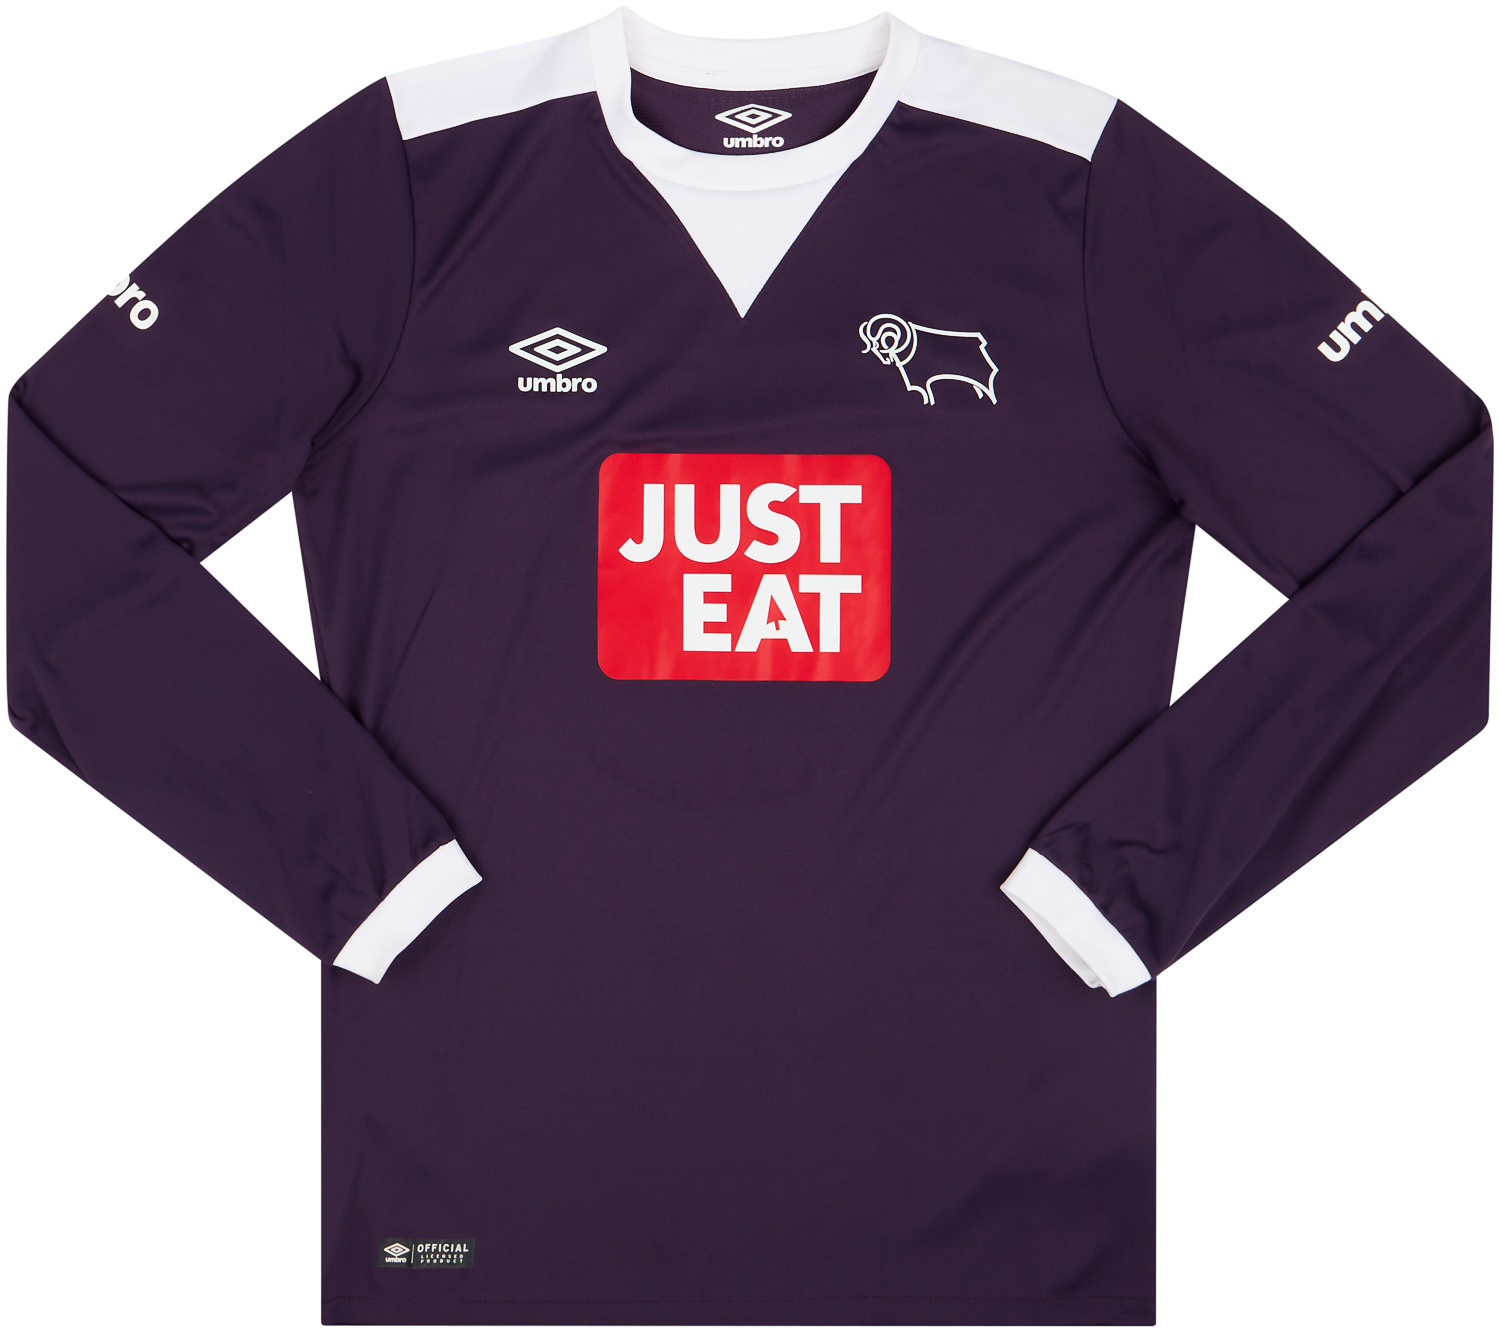 2015-16 Derby County Away Shirt - 9/10 - ()